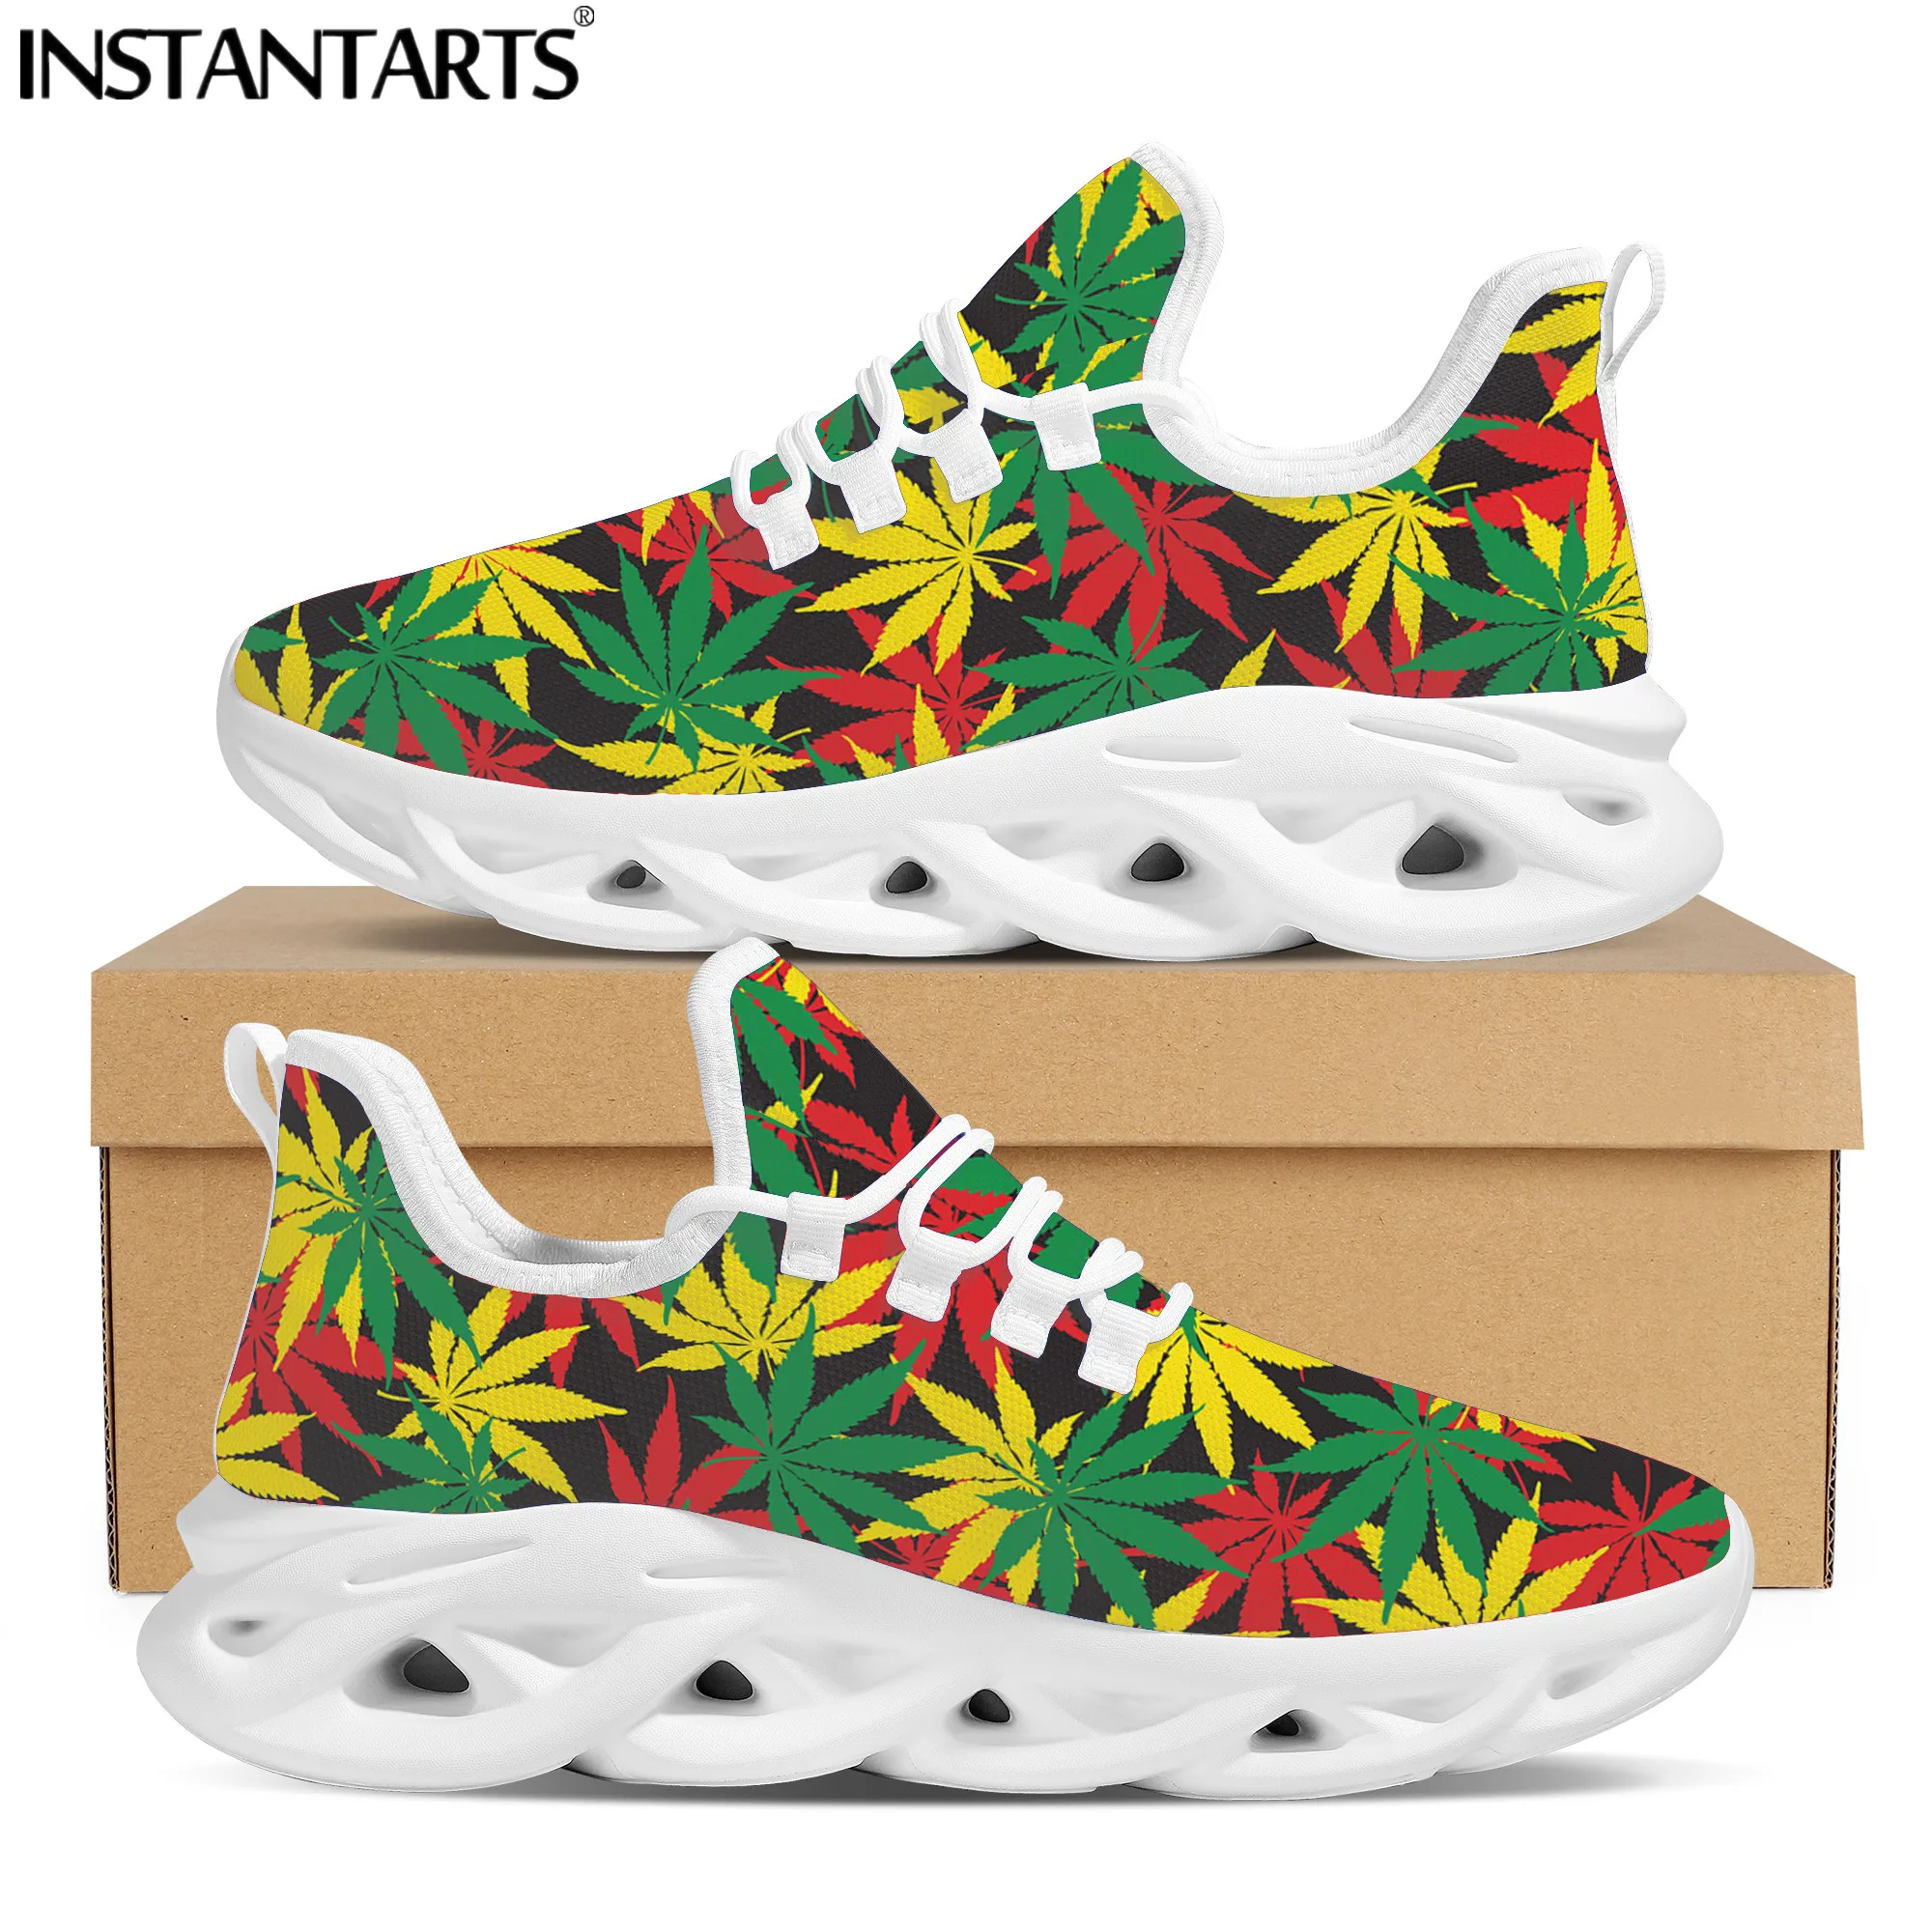 

INSTANTARTS Colorful Weed Leaves 3D Print Women Mesh Swing Sneakers Casual Lace Up Platform Flat Female Light Elastic Zapatillas